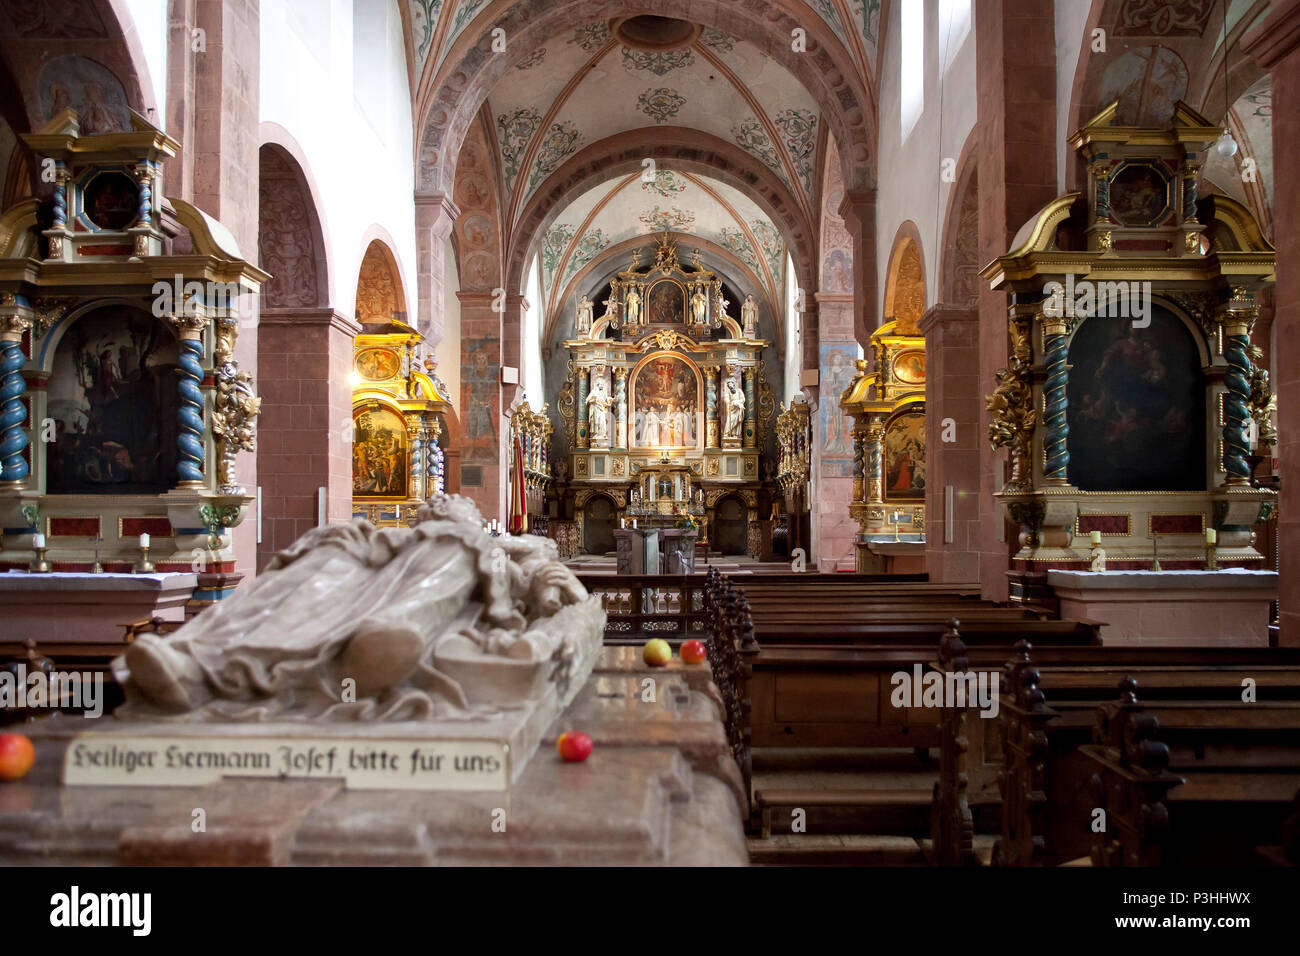 Germany, inside the basilica of Steinfeld Abbey in Kall in the Eifel region, nave with the sarcophagus of the saint Hermann Joseph.  Deutschland, in d Stock Photo